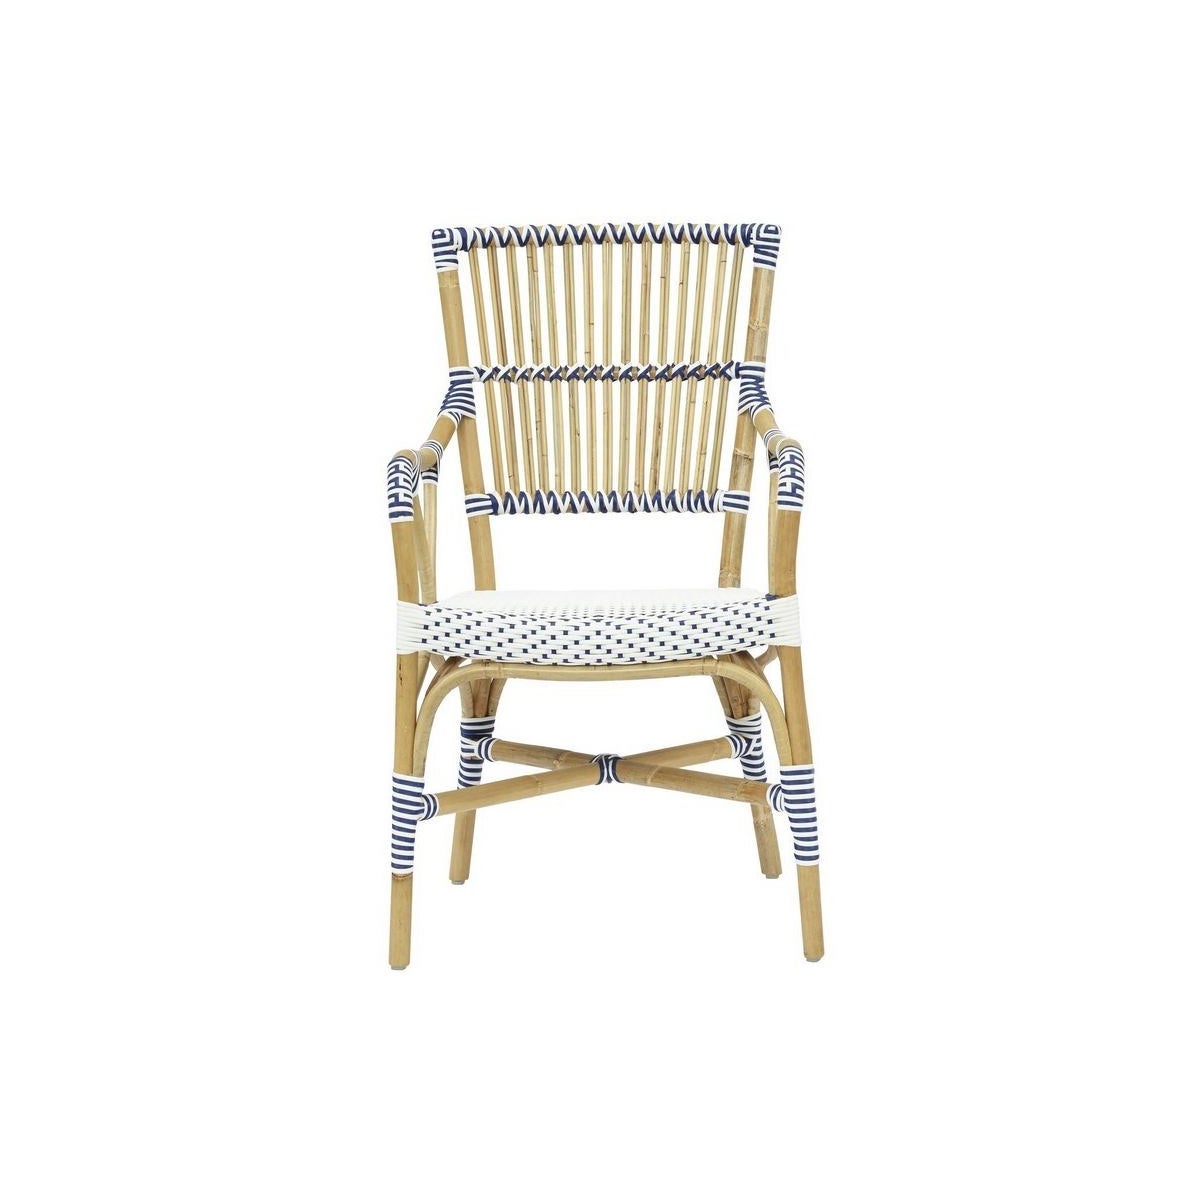 Madrid Arm Chair Frame Color - Natural   Woven Seat and Back  Color - White/Navy